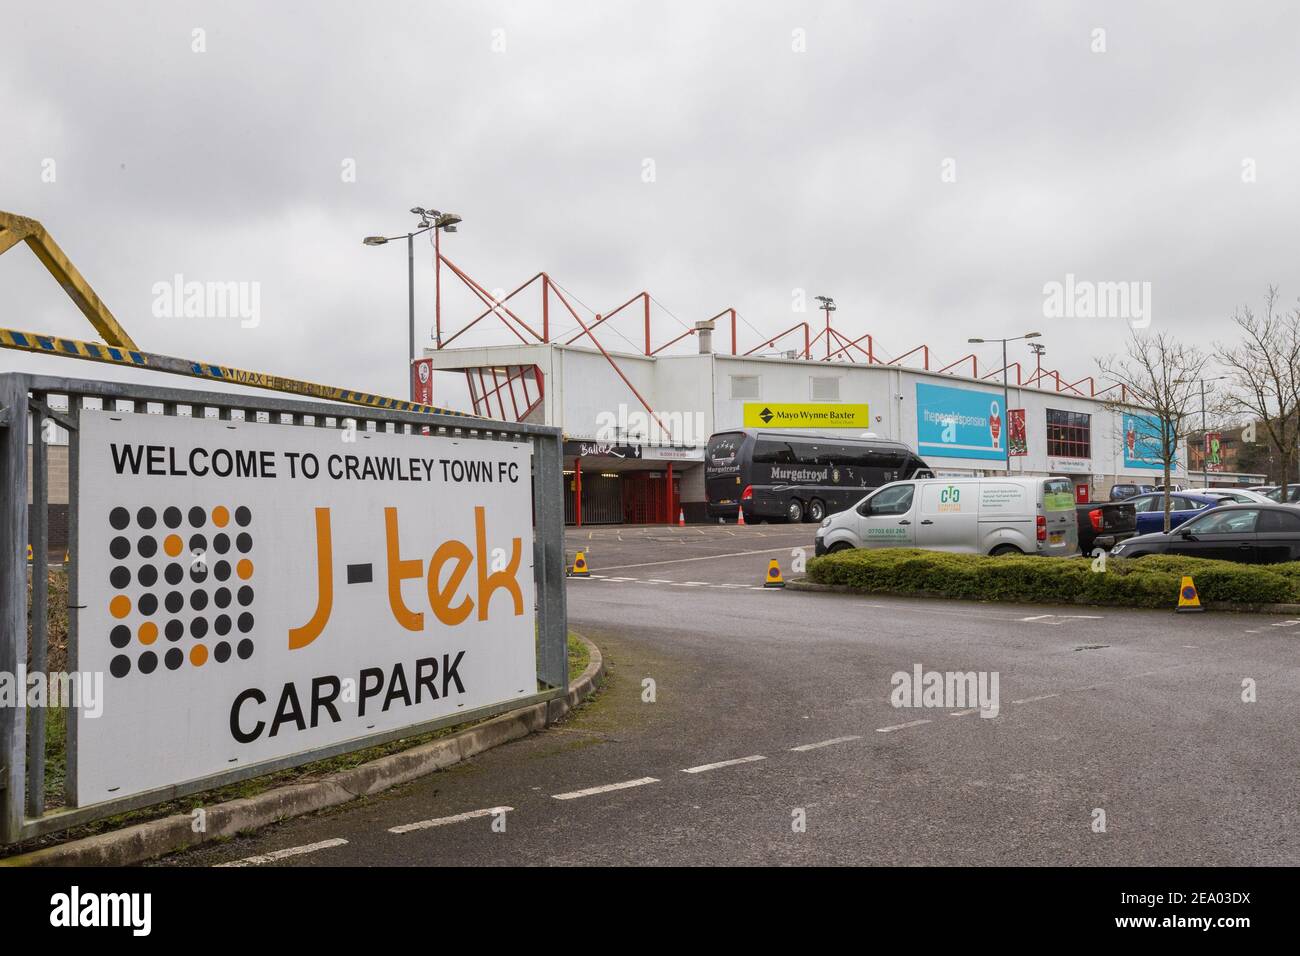 Crawley, UK. 06th Feb, 2021. General view of The People's Pension Stadium in Crawley, UK on 2/6/2021. (Photo by Jane Stokes/News Images/Sipa USA) Credit: Sipa USA/Alamy Live News Stock Photo